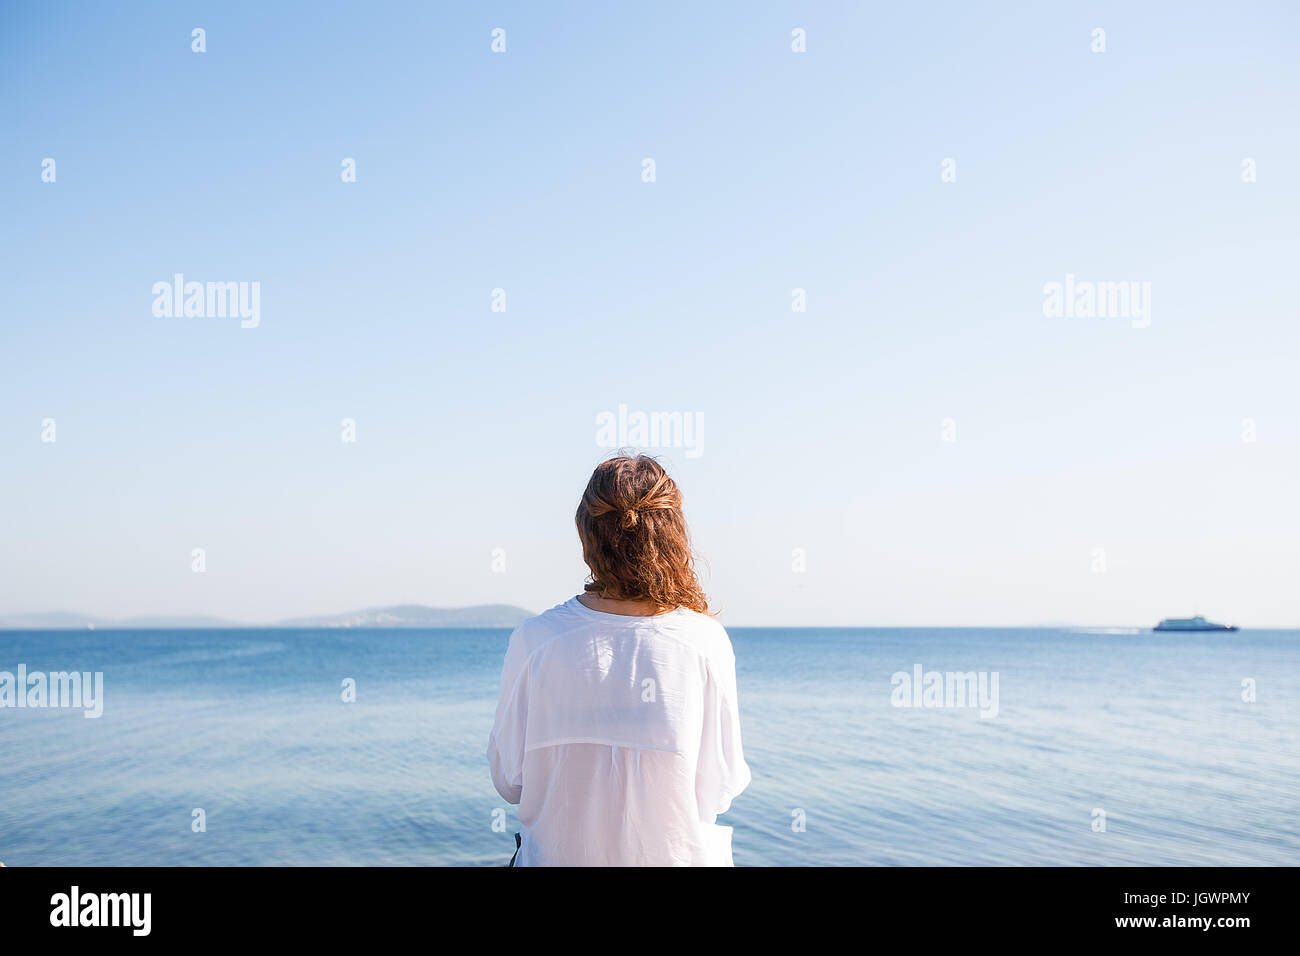 Woman on holiday by the seaside, Istanbul, Turkey, Asia Stock Photo